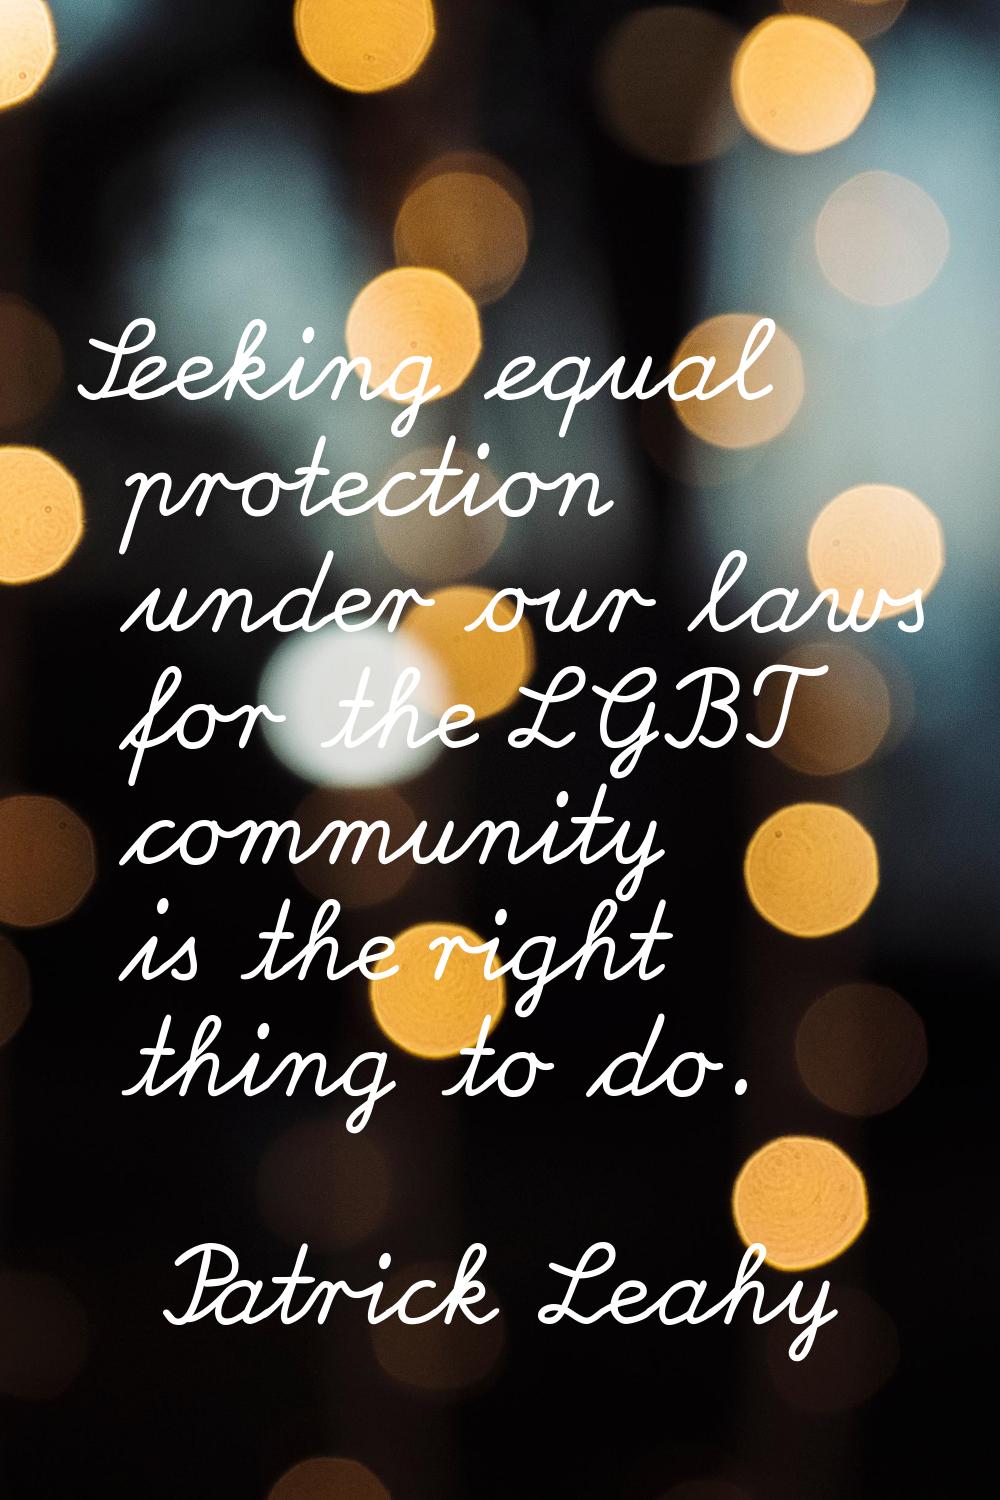 Seeking equal protection under our laws for the LGBT community is the right thing to do.